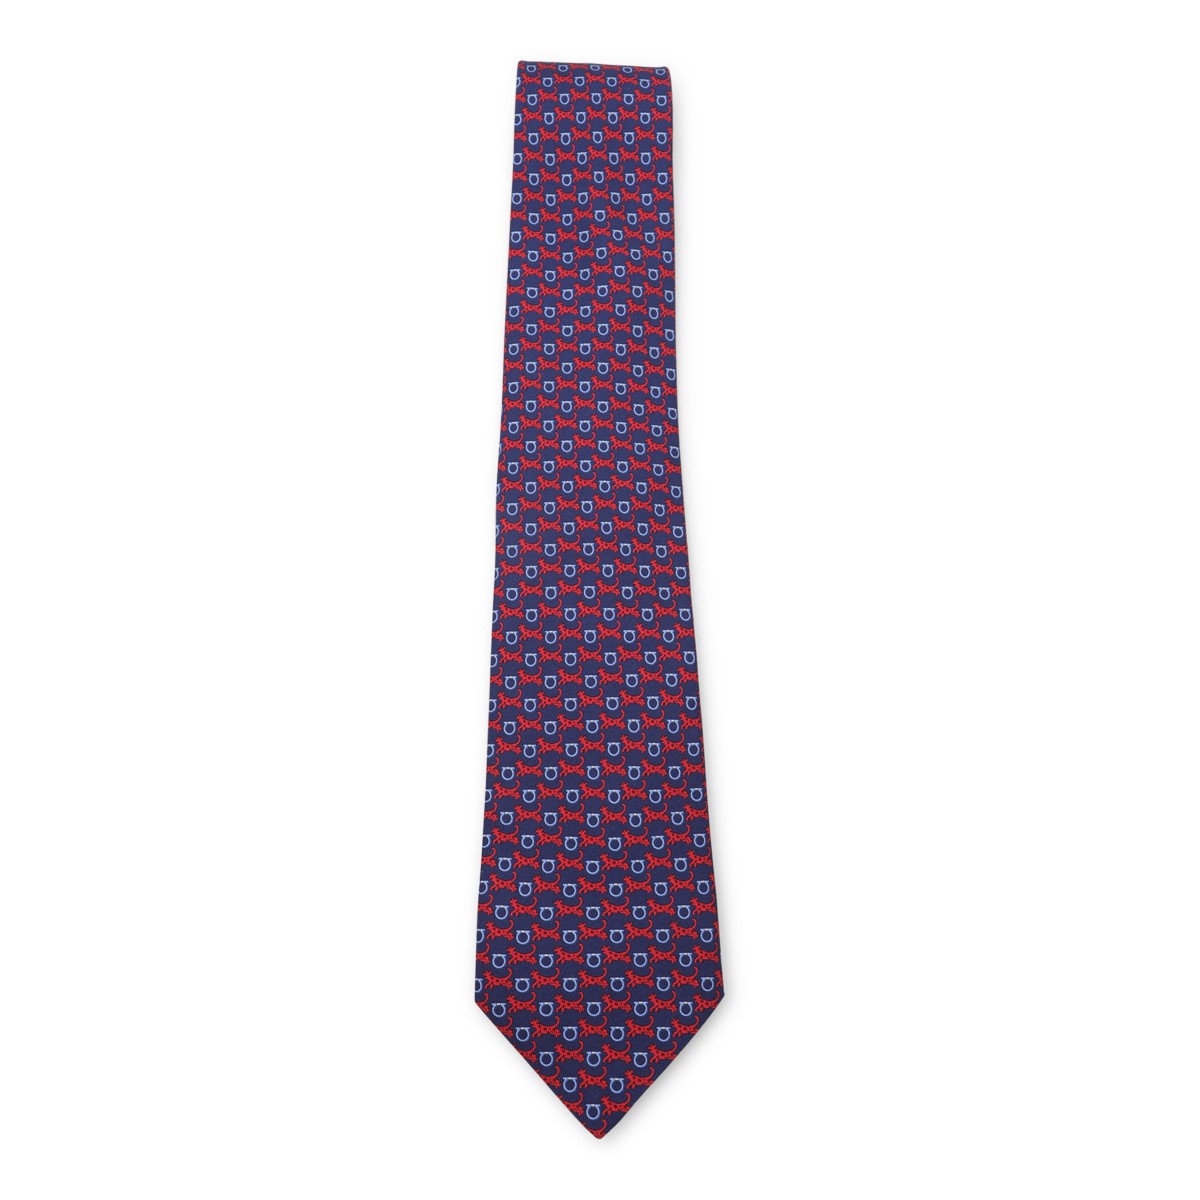 NAVY AND RED SILK TIE